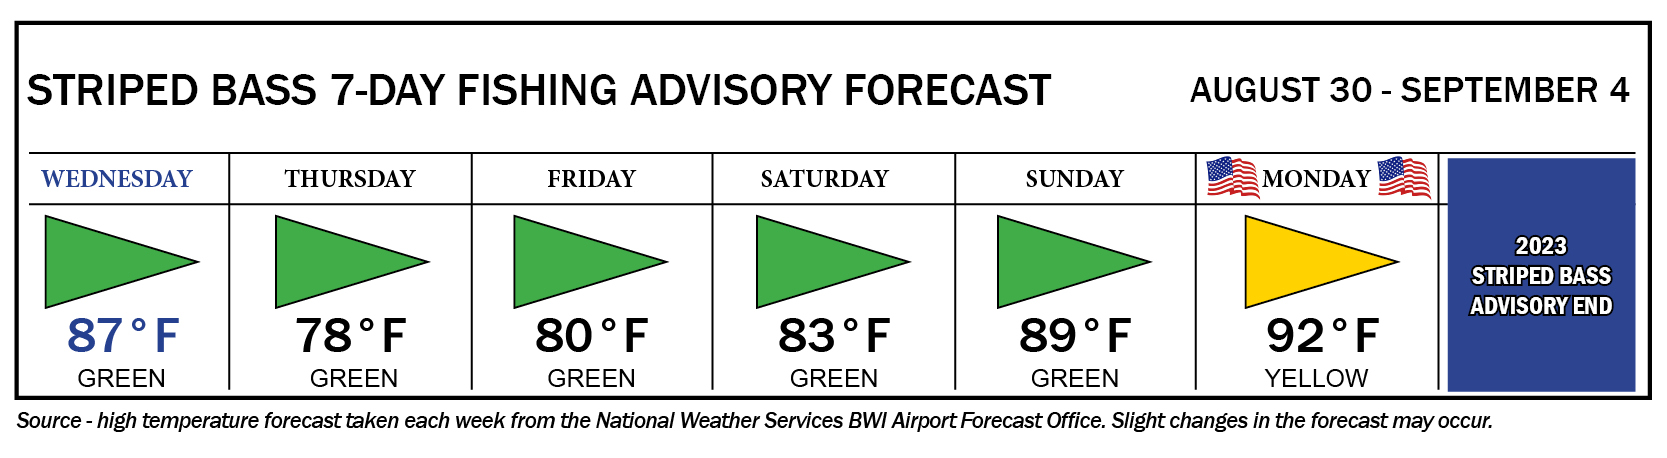 Image of weekly forecast August 23-29, featuring green flag fishing days Wednesday and Thursday, yellow on Friday, and green Saturday through Tuesday